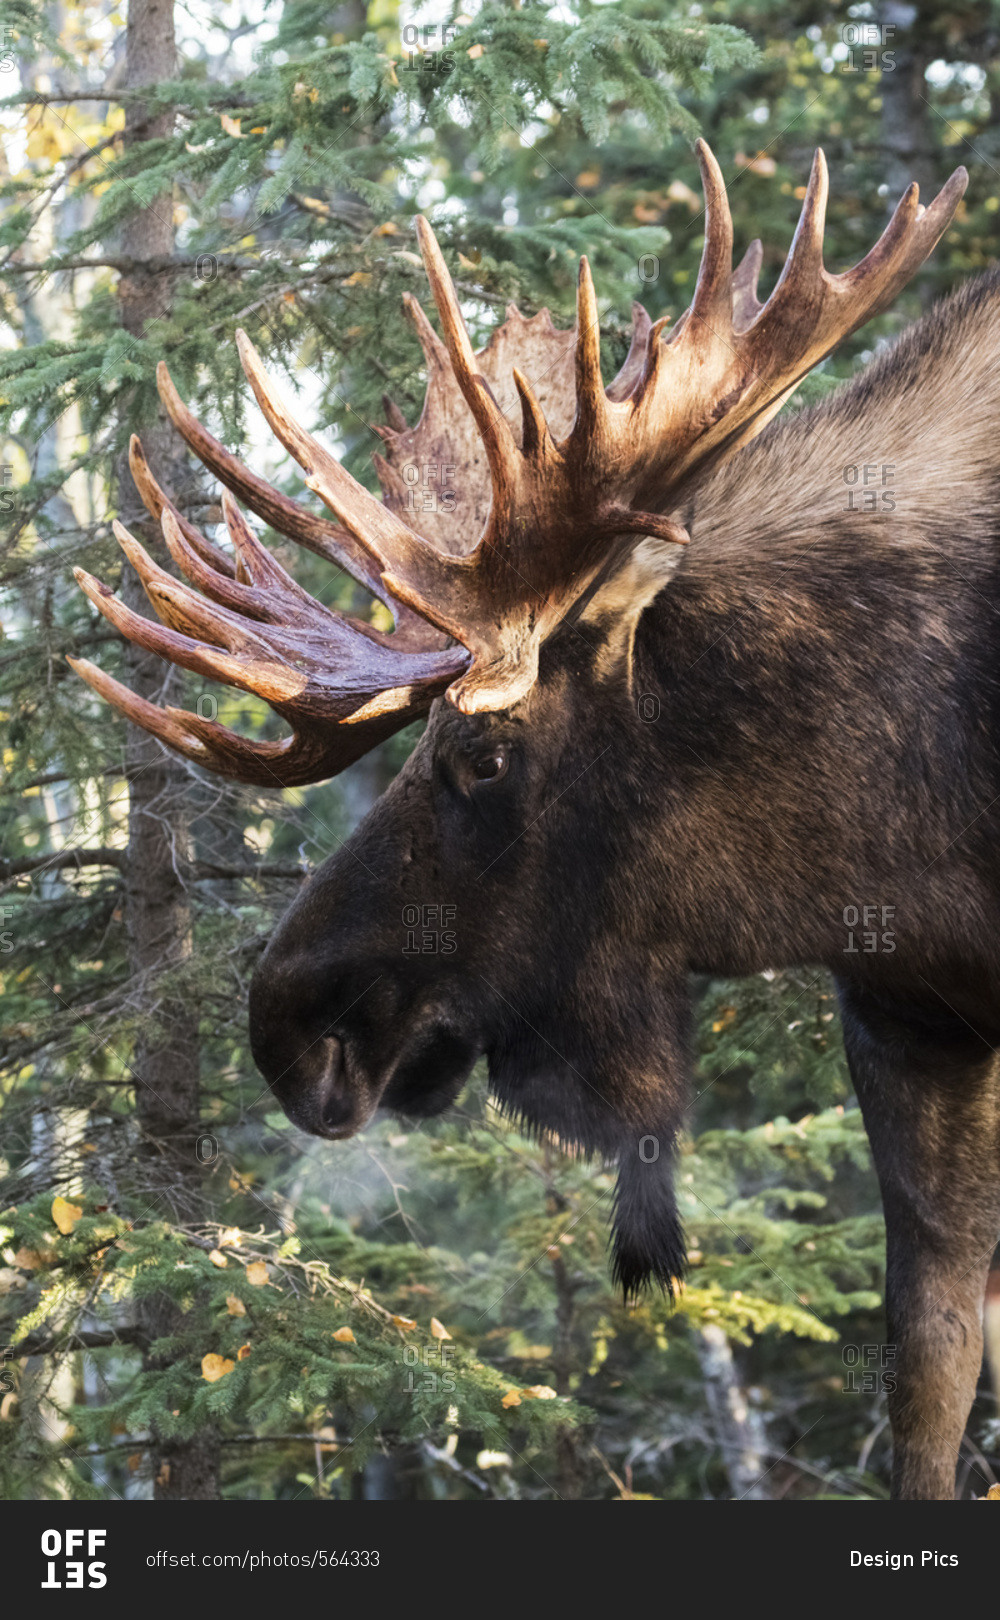 Bull moose (alces alces) with antlers standing beside trees in a forest, South-central Alaska, Alaska, United States of America